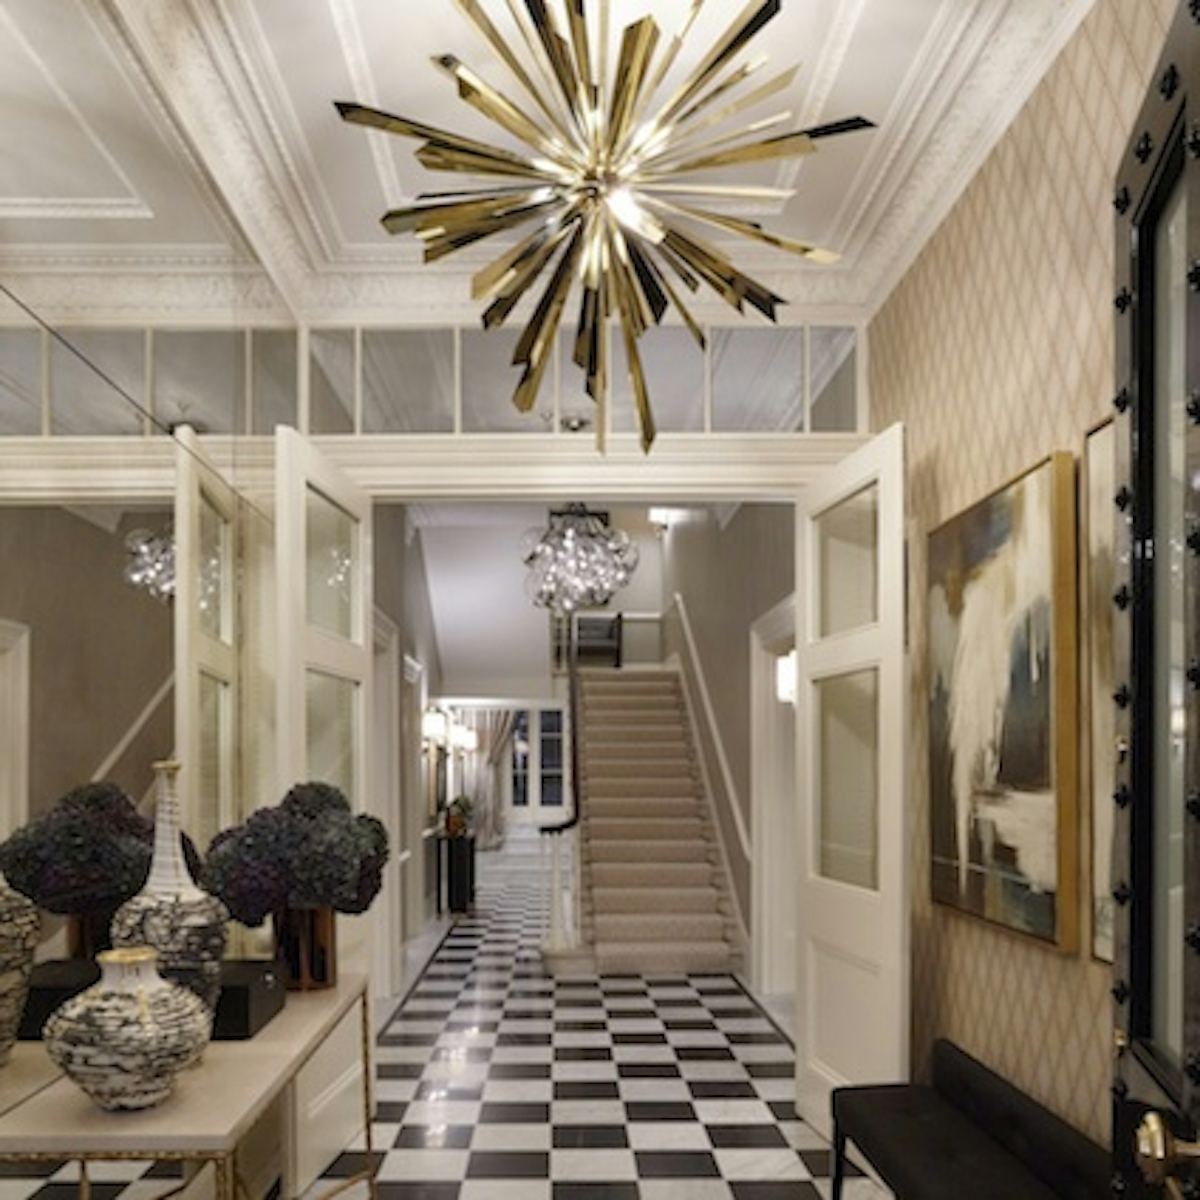 8 Rooms Transformed Using Statement Chandeliers | LuxDeco.com Style Guide